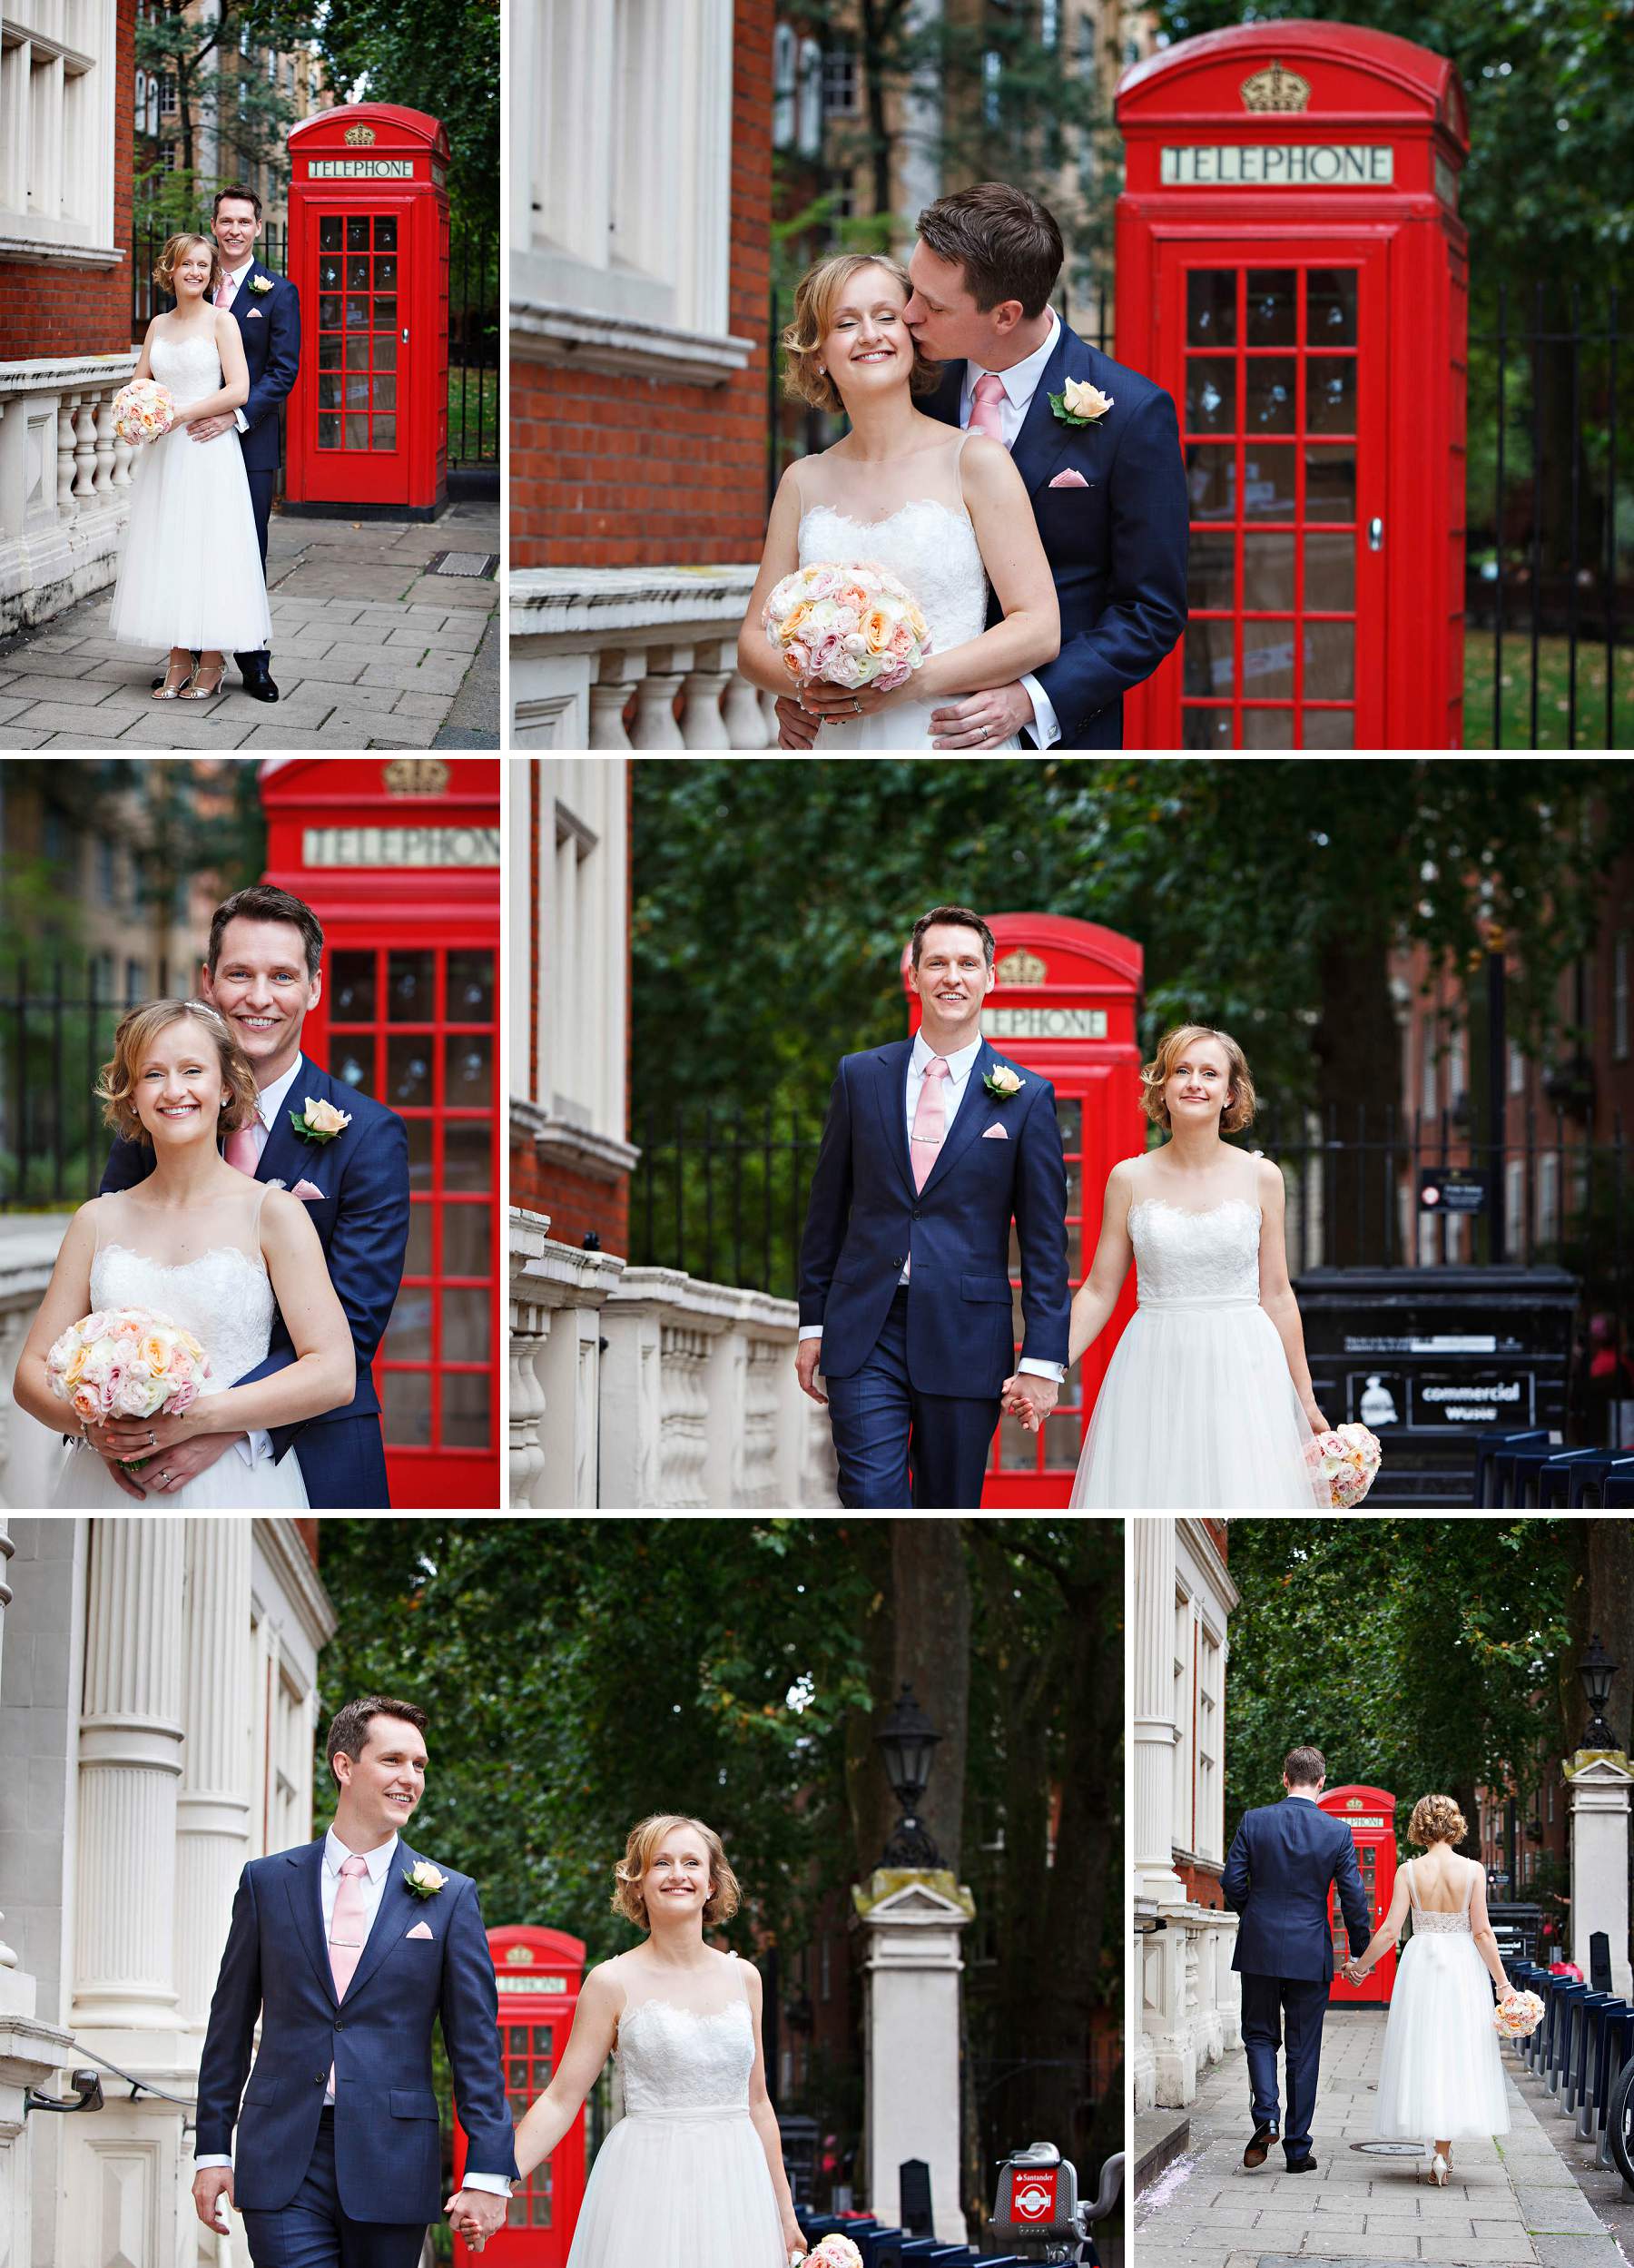 Mayfair wedding photos featuring classic red London phone booth